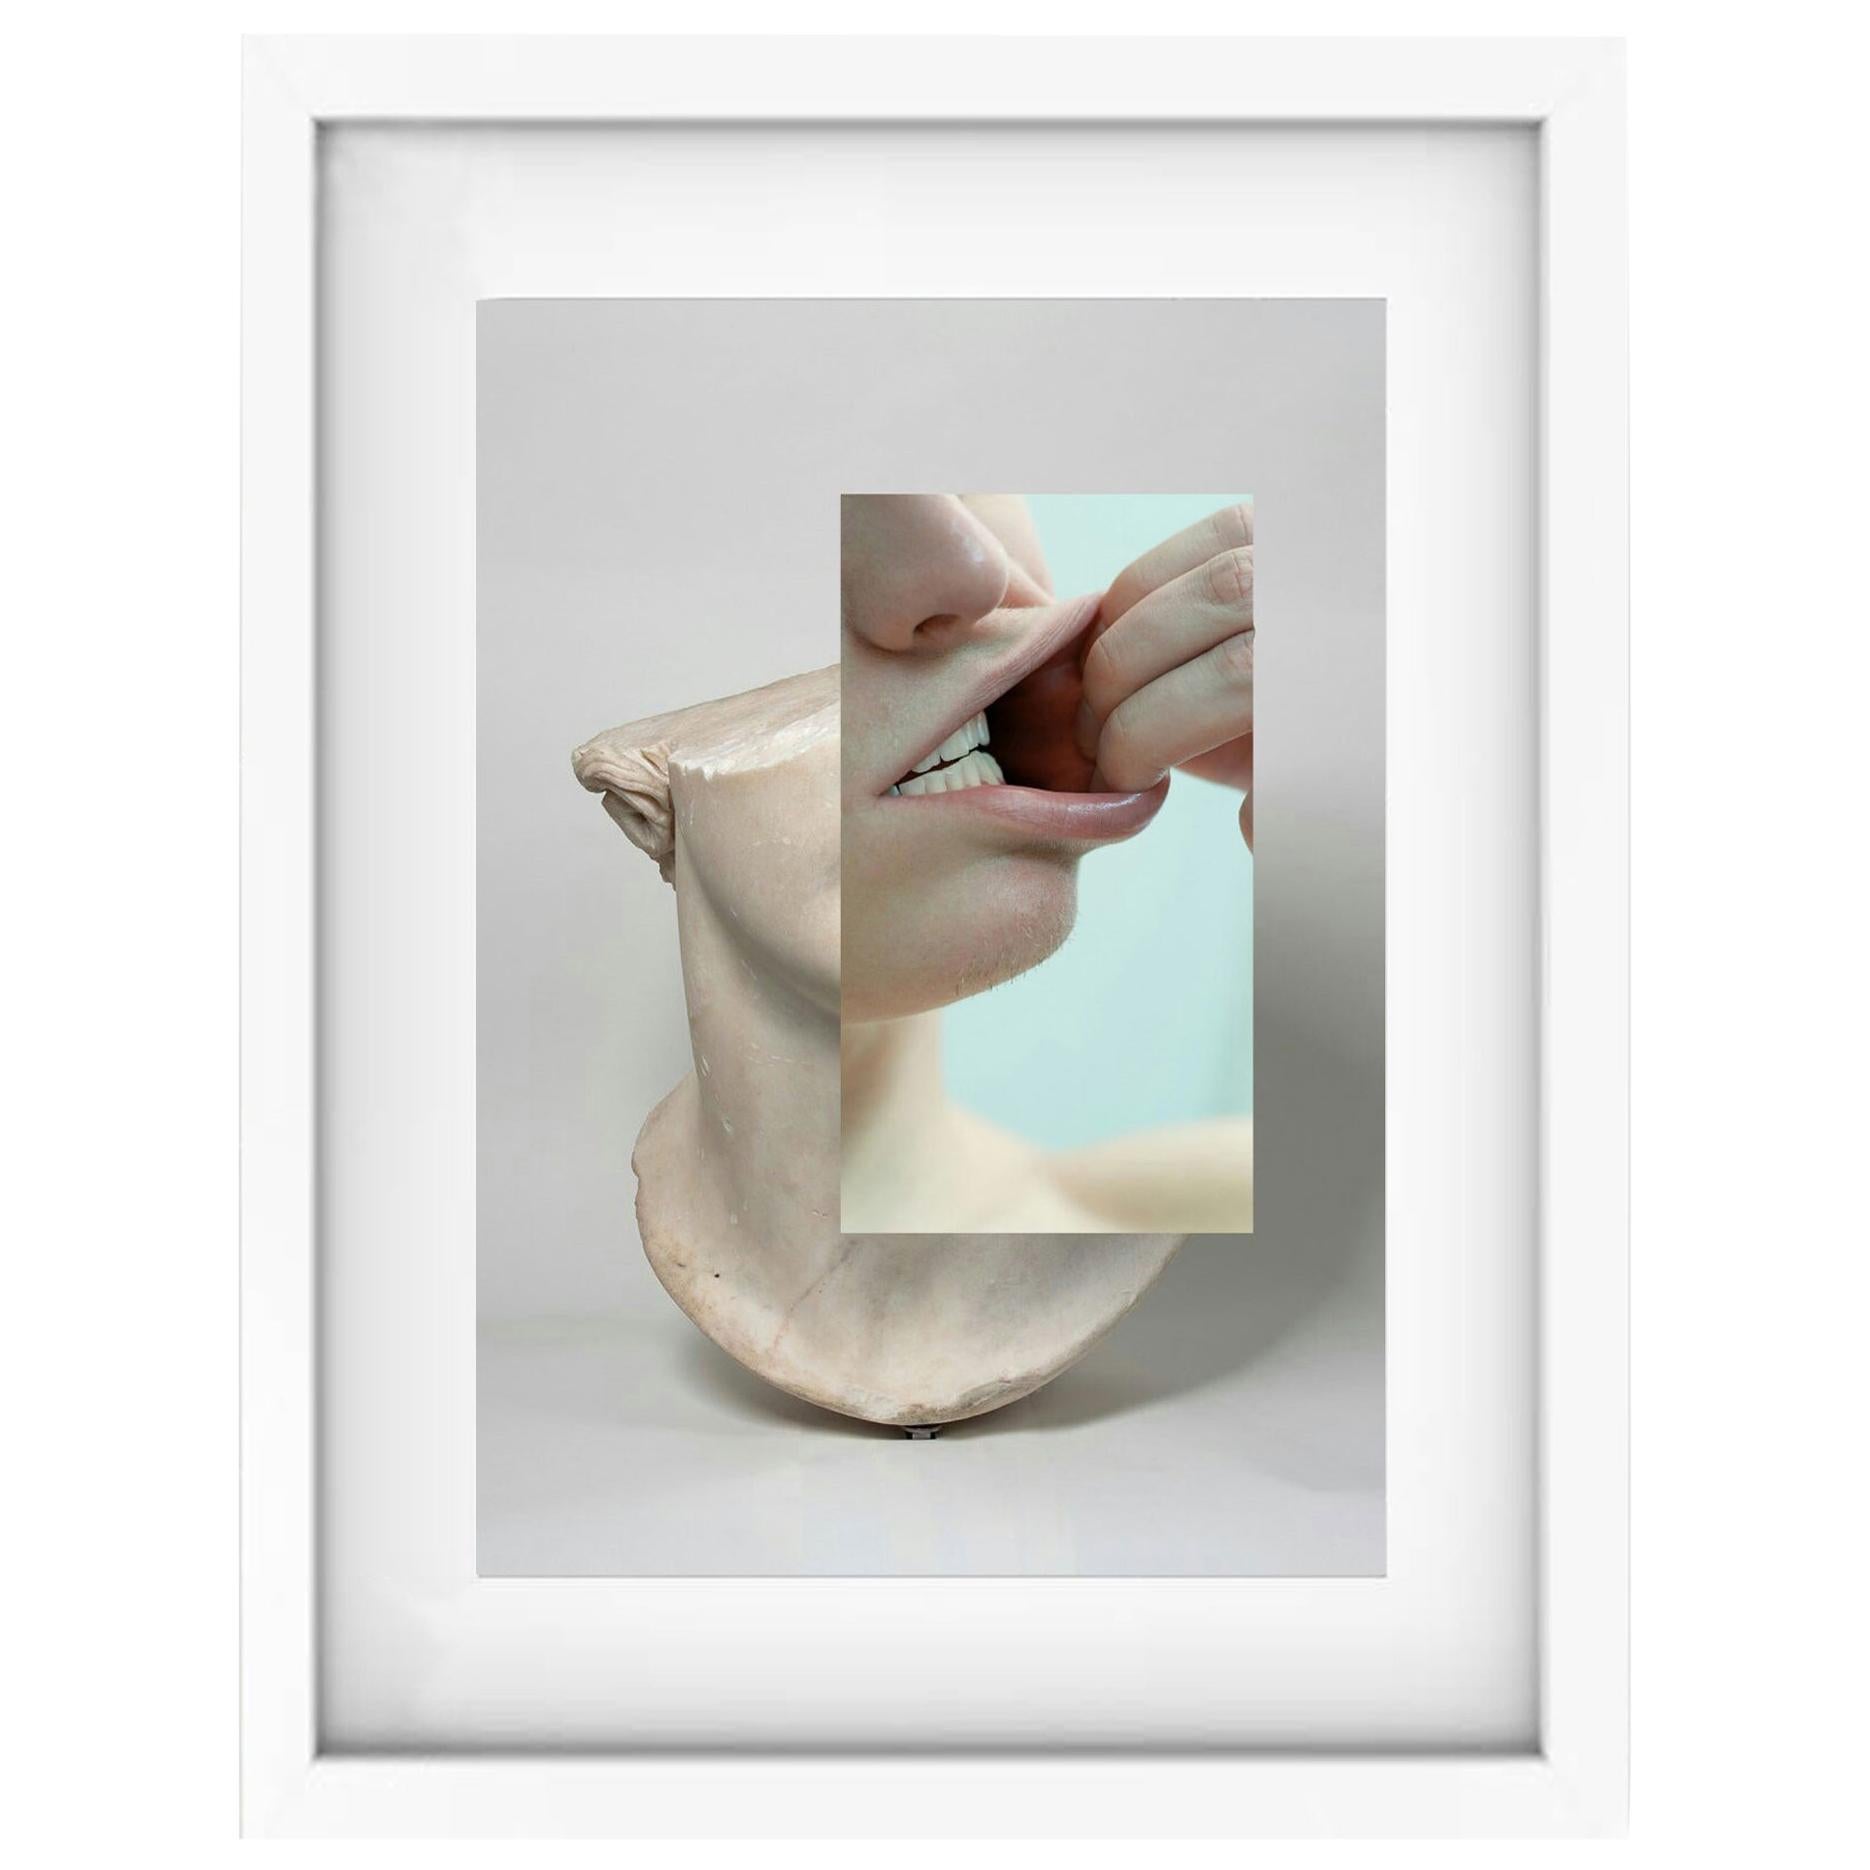 Classic Sculpture Mouth Naro Pinosa, "Untitled" Digital Collage, Spanien, 2019